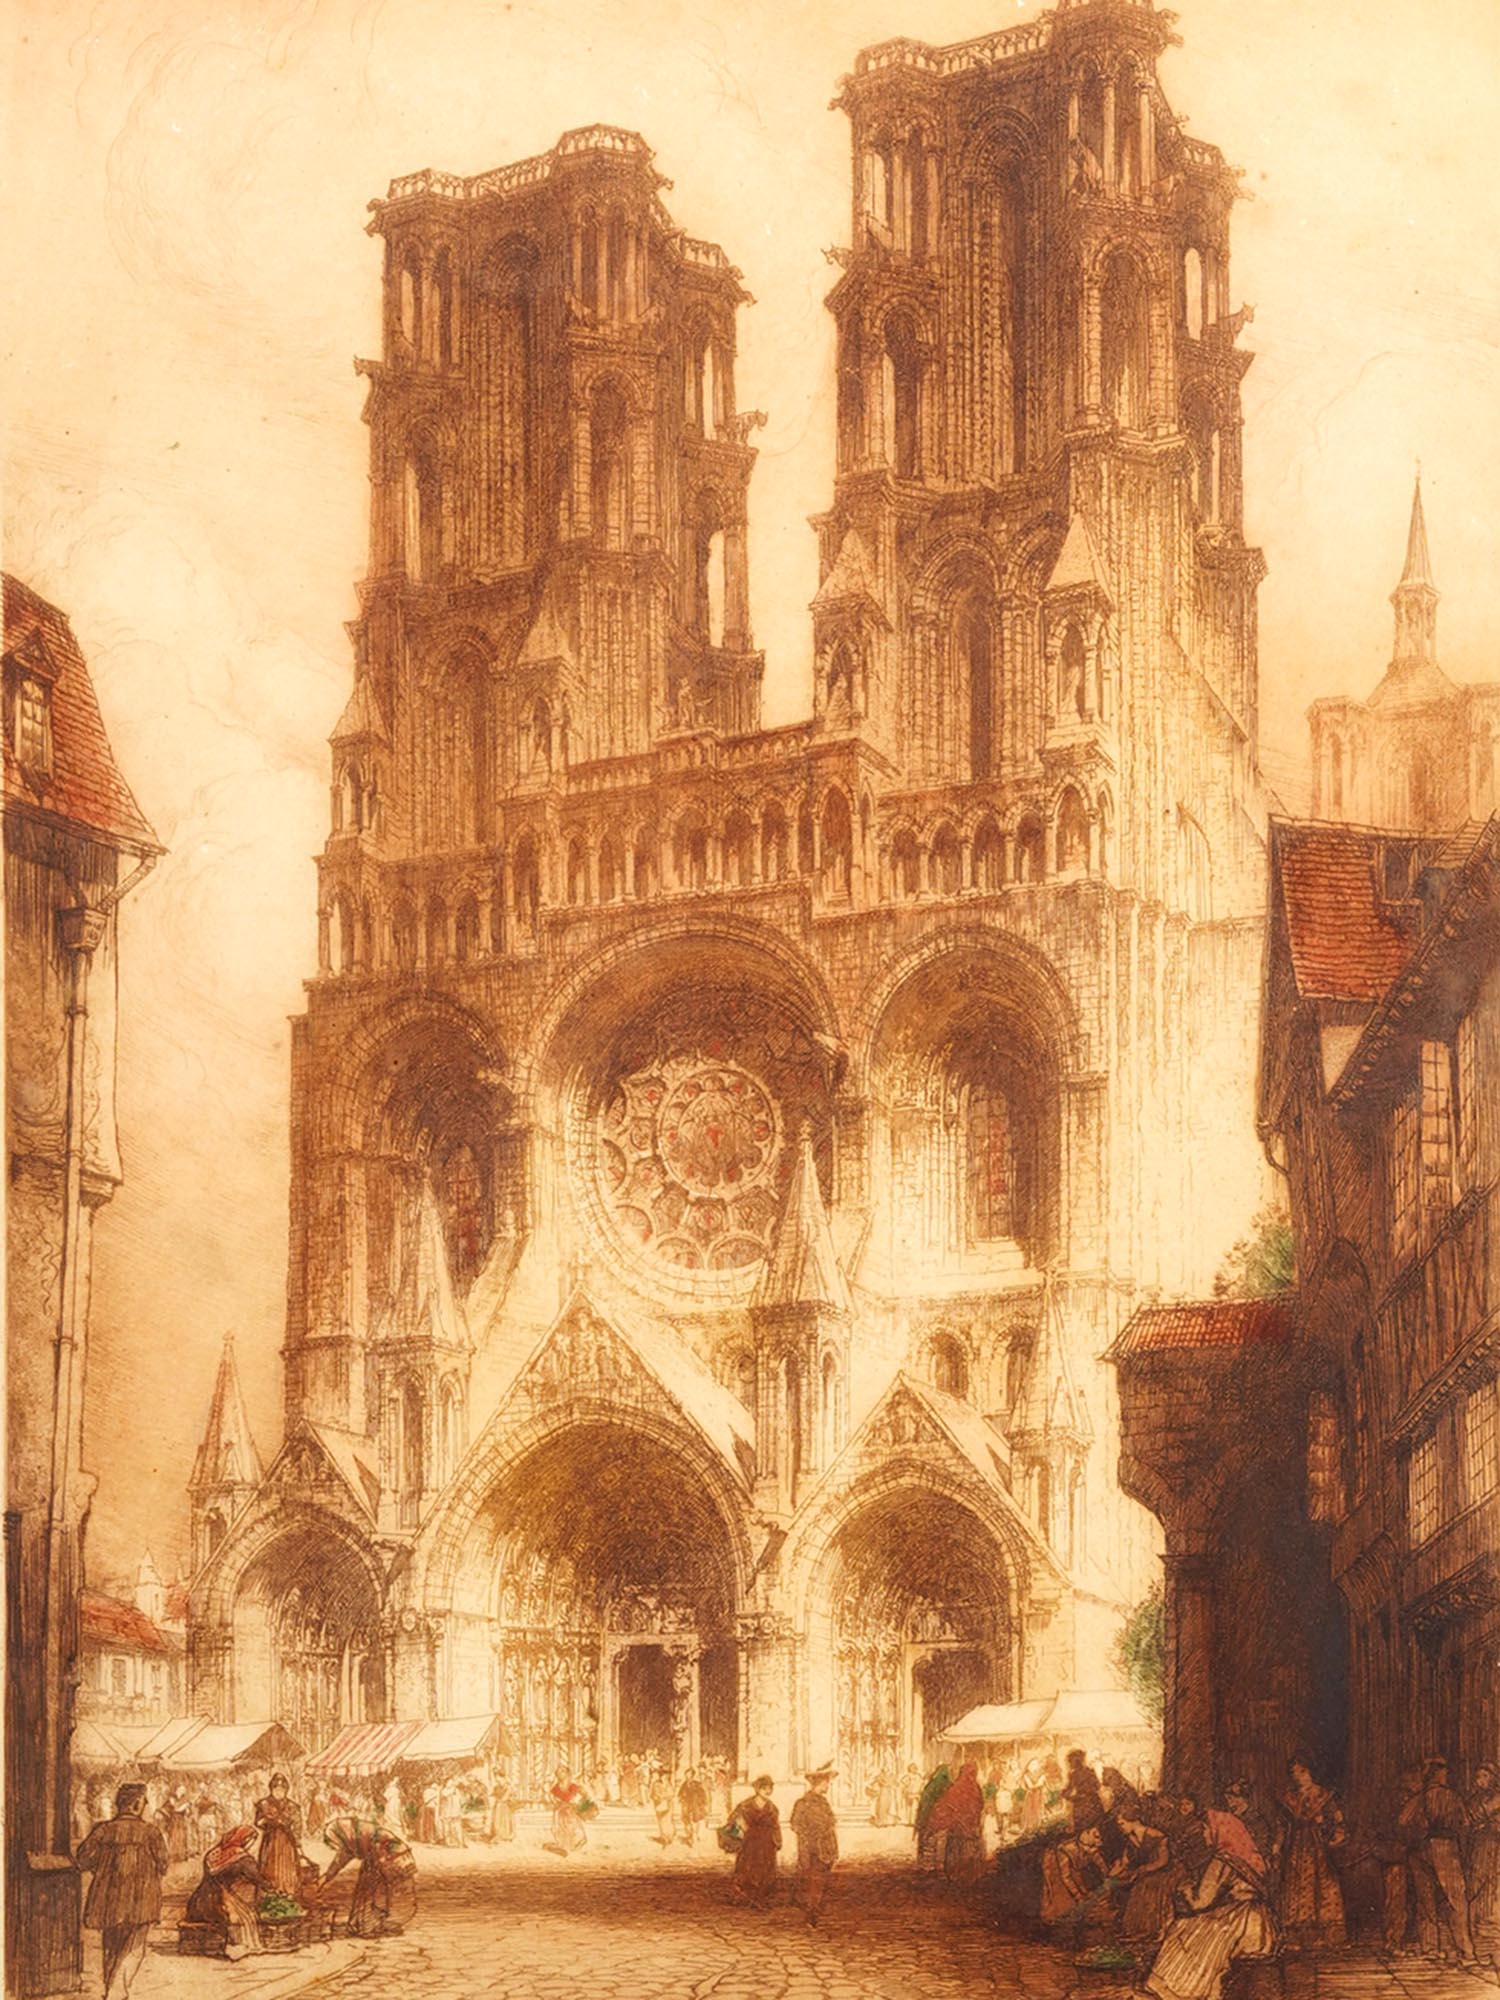 NOTRE DAME DE PARIS ETCHING BY JAMES AND HENRY BREWER PIC-1